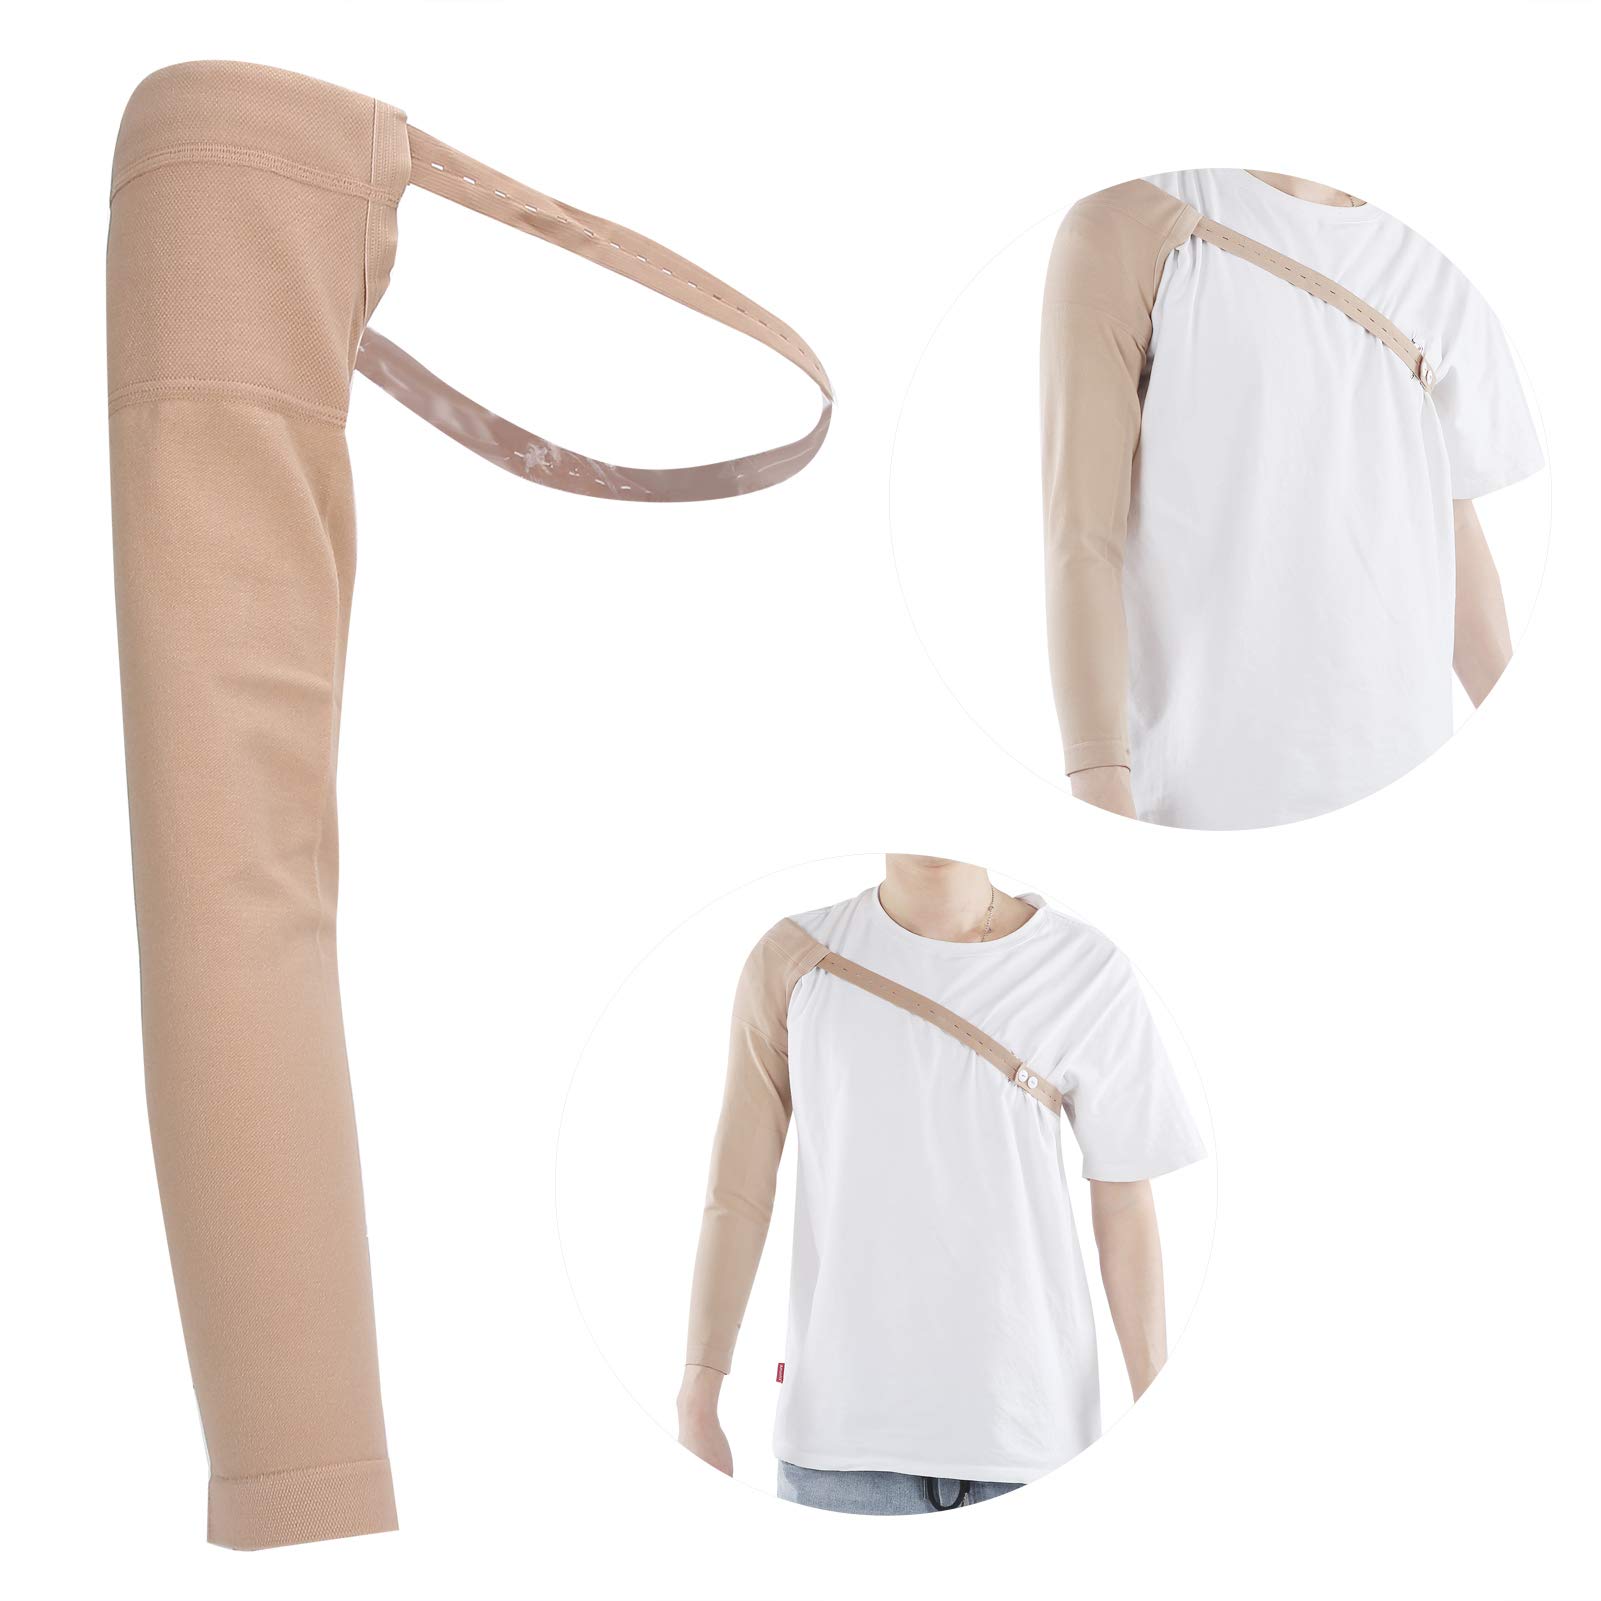 Post Mastectomy Compression Sleeve Elastic Lymphedema Sleeve Arm Swelling  Arm Lymphedema Edema Arm Support Brace for